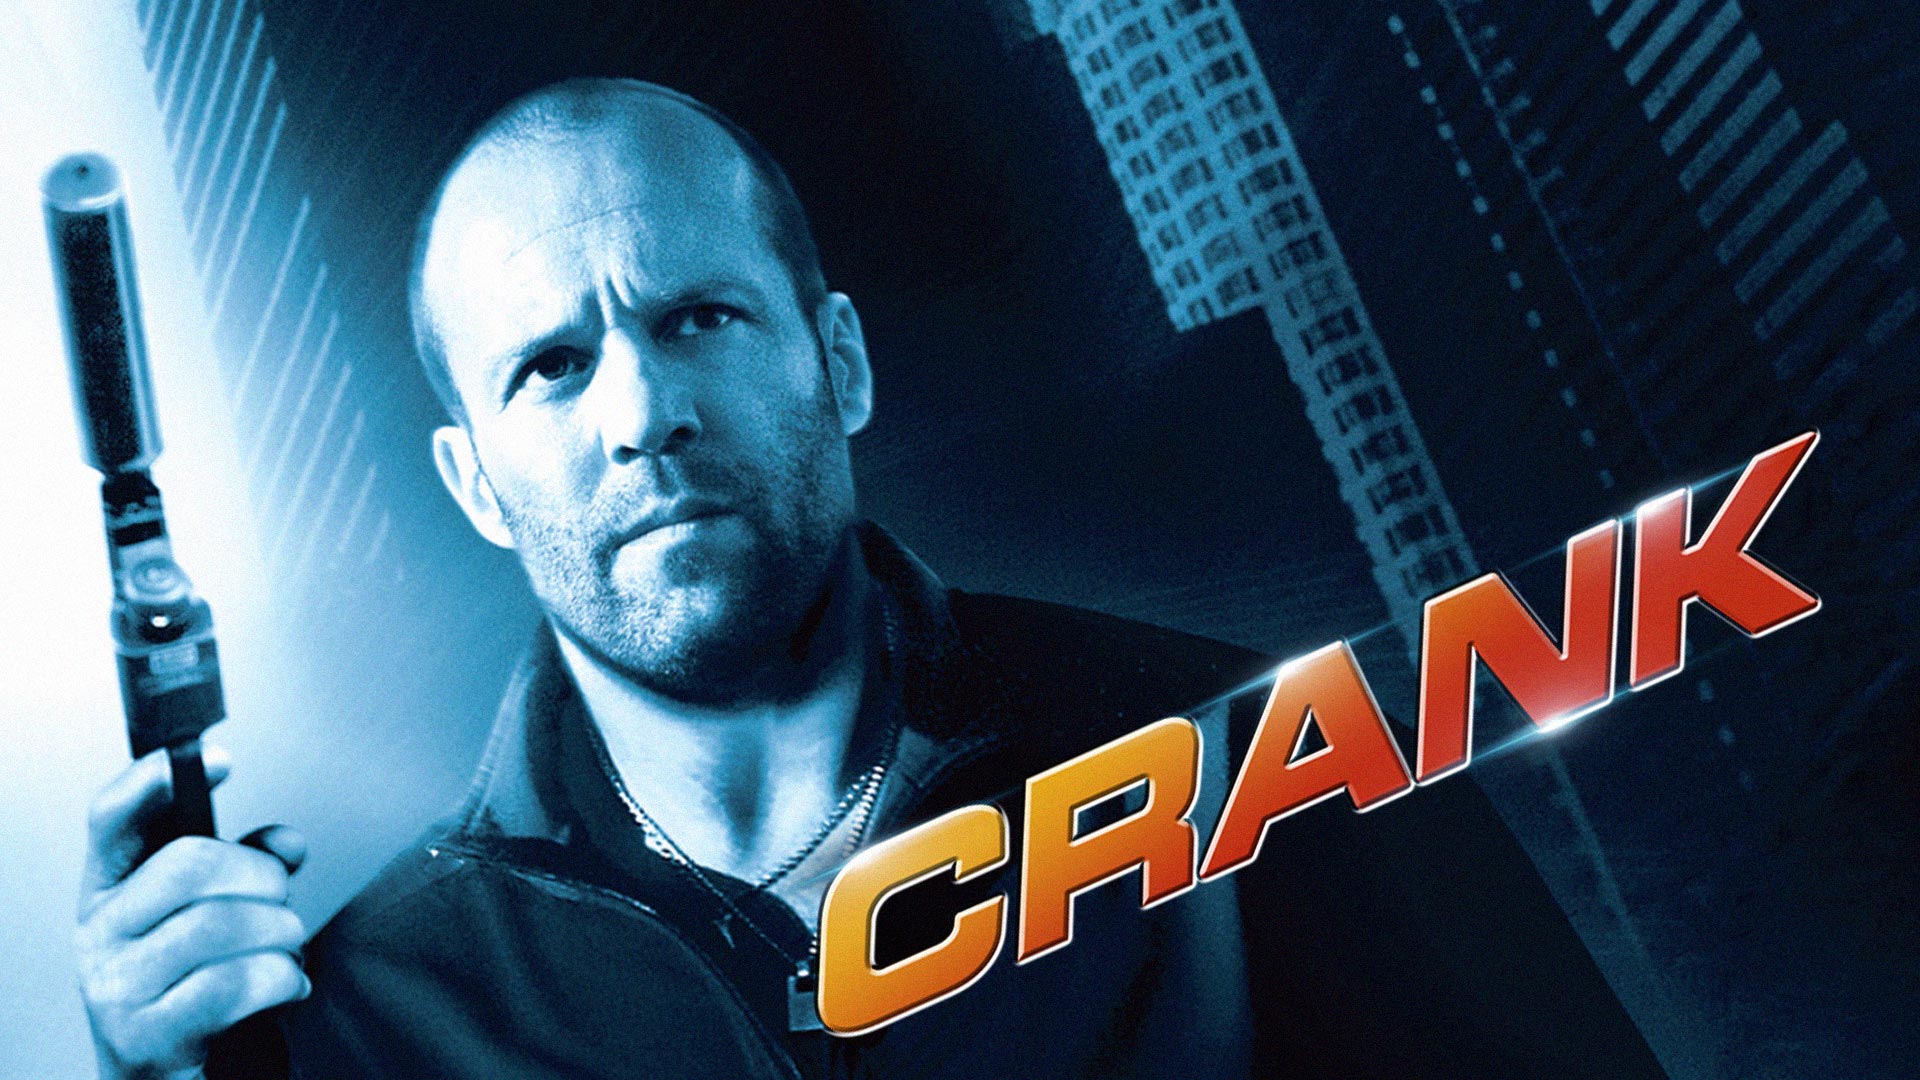 bradley baer recommends crank movie online free pic